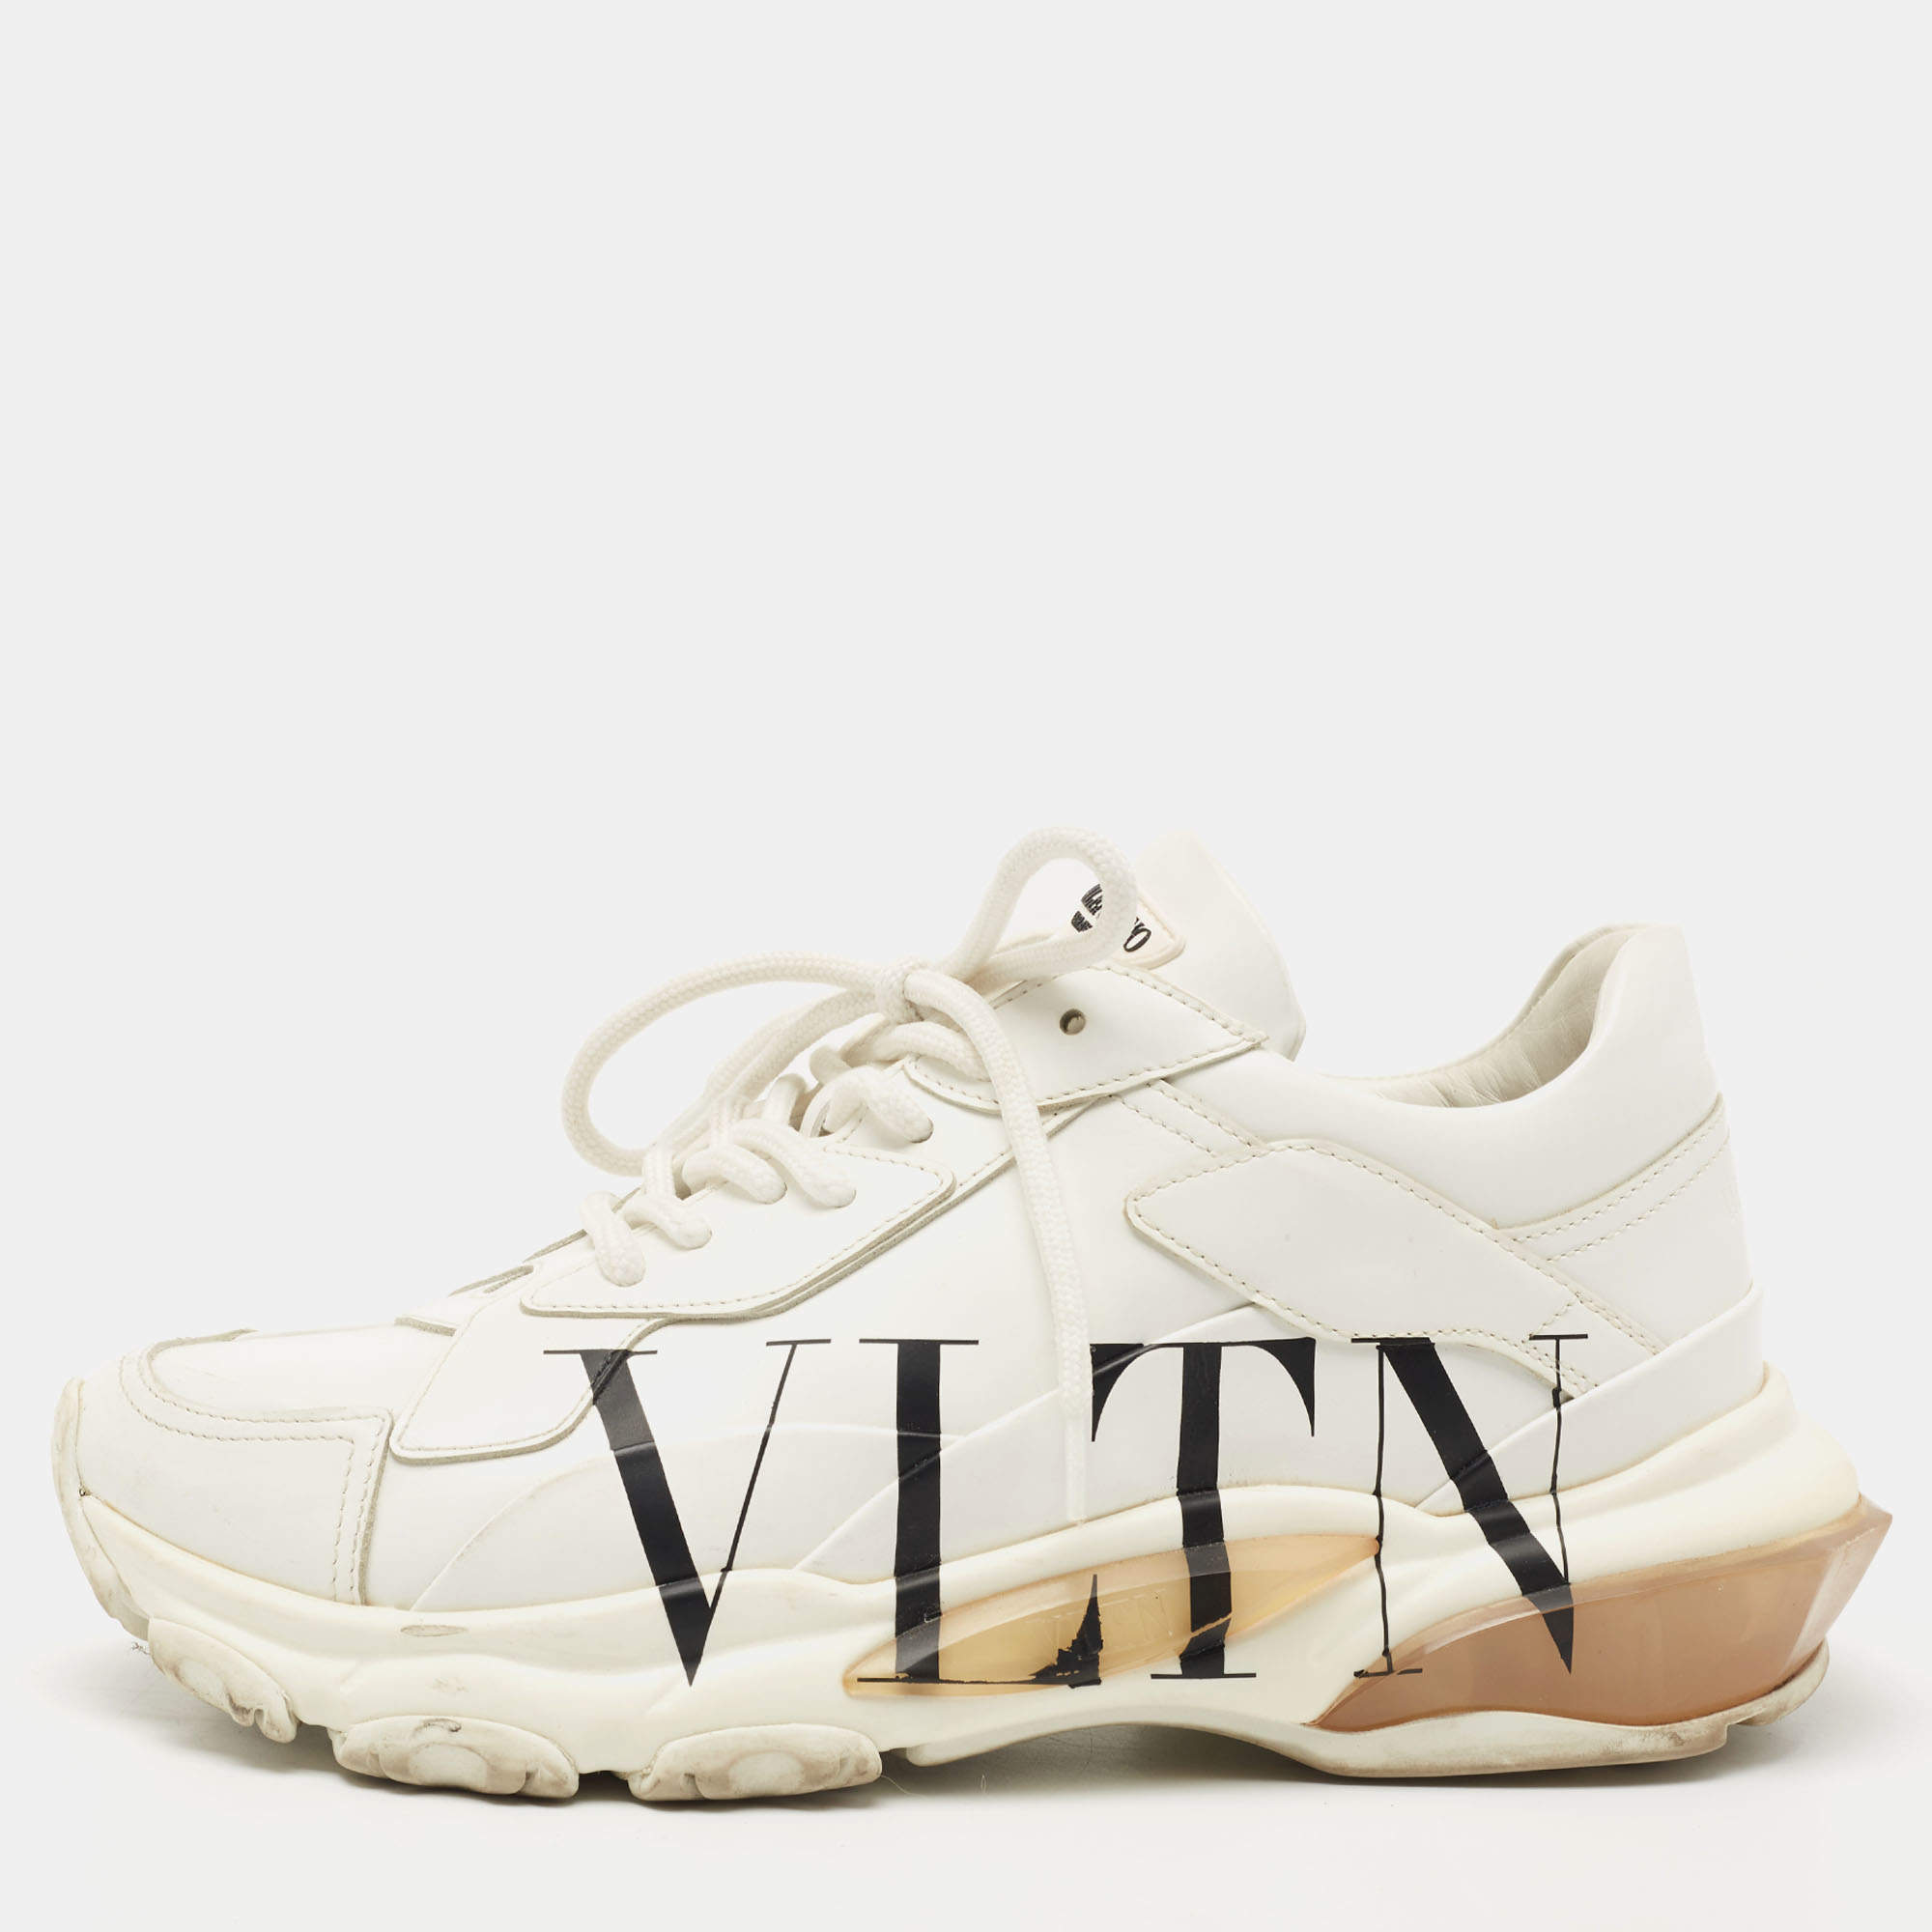 Valentino White Leather VLTN Lace Up Sneakers Size 38